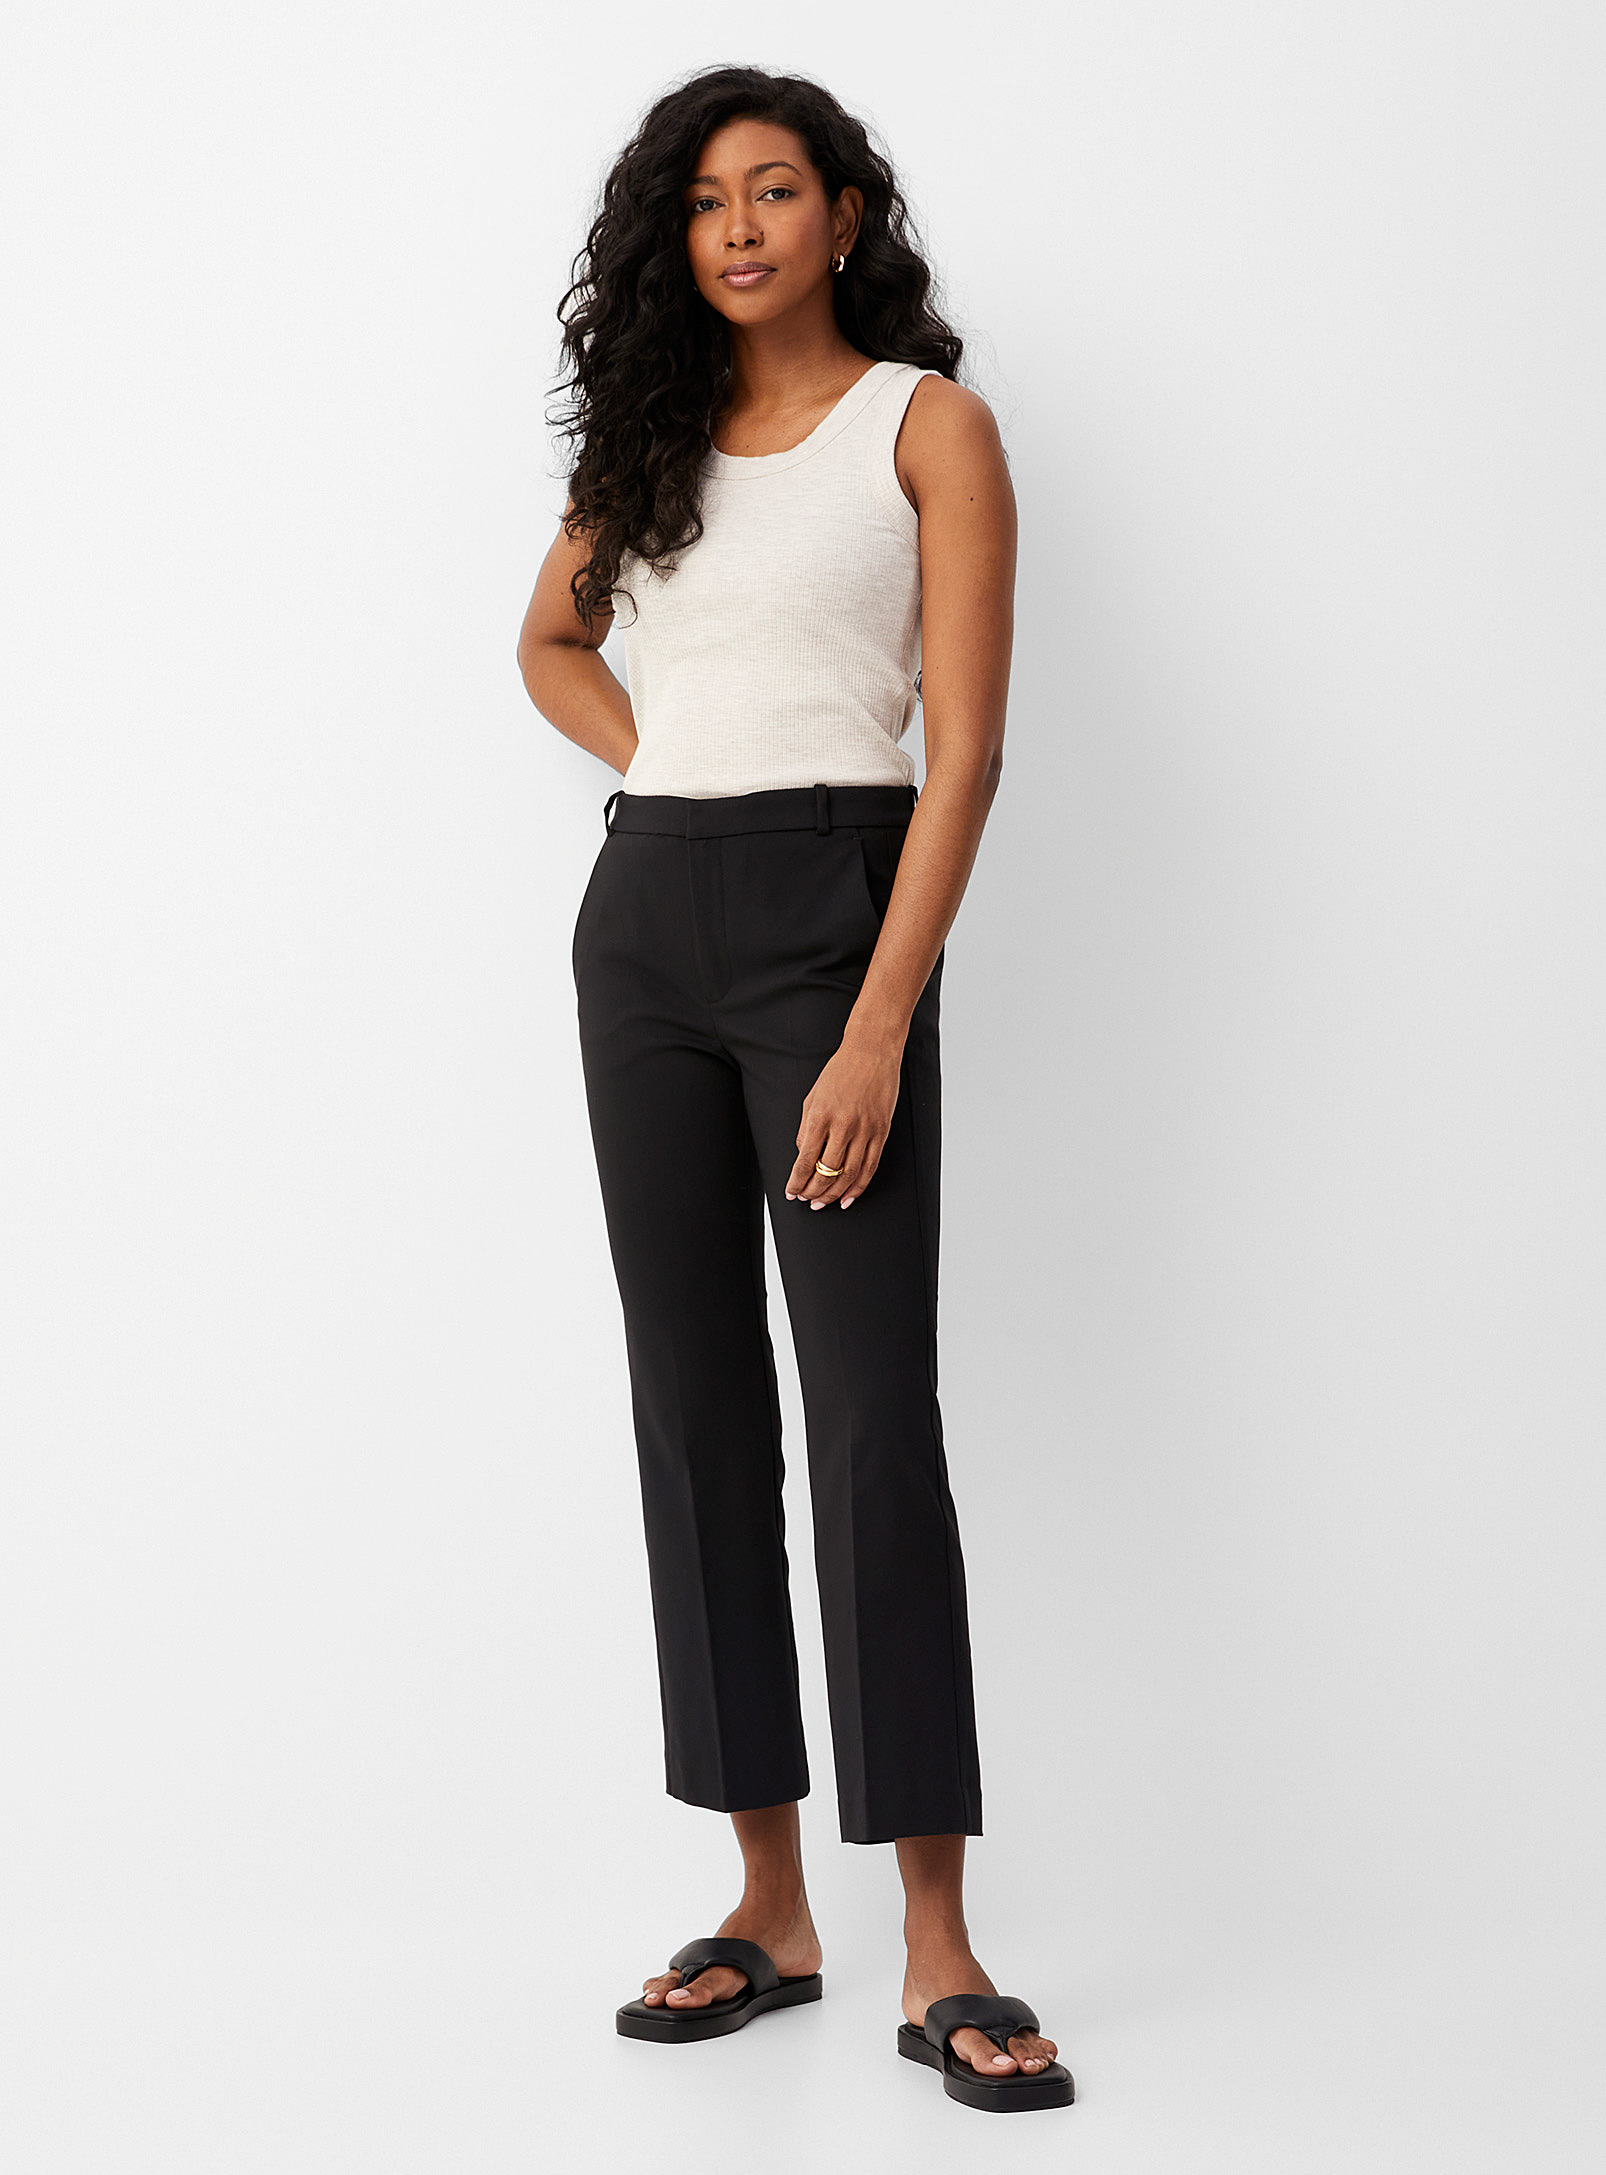 Inwear Black Zella Structured Tapered Pant